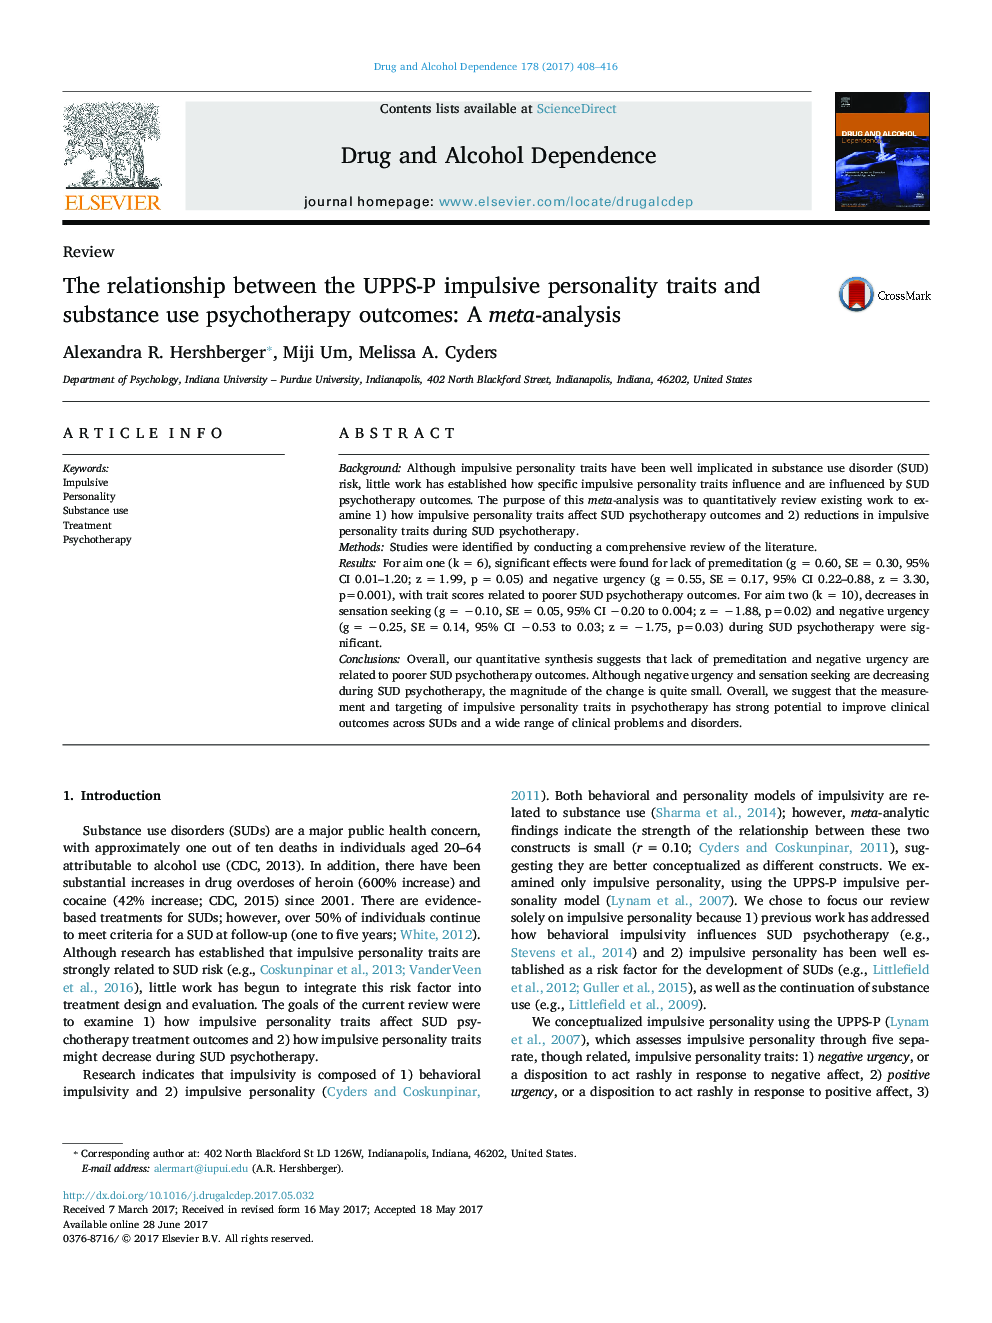 The relationship between the UPPS-P impulsive personality traits and substance use psychotherapy outcomes: A meta-analysis